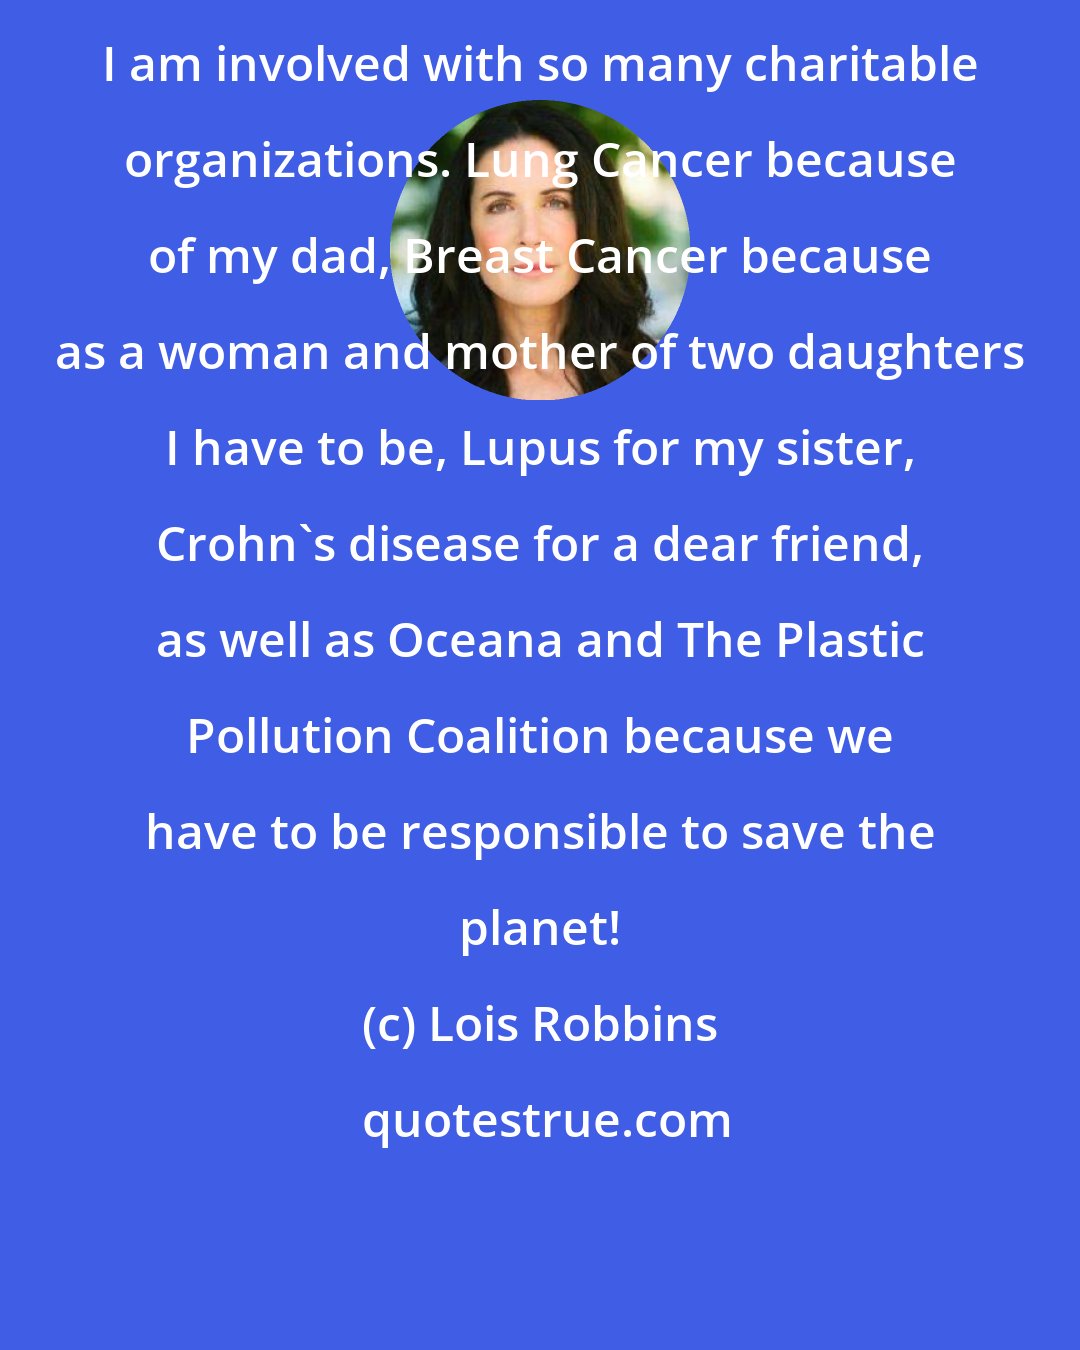 Lois Robbins: I am involved with so many charitable organizations. Lung Cancer because of my dad, Breast Cancer because as a woman and mother of two daughters I have to be, Lupus for my sister, Crohn's disease for a dear friend, as well as Oceana and The Plastic Pollution Coalition because we have to be responsible to save the planet!